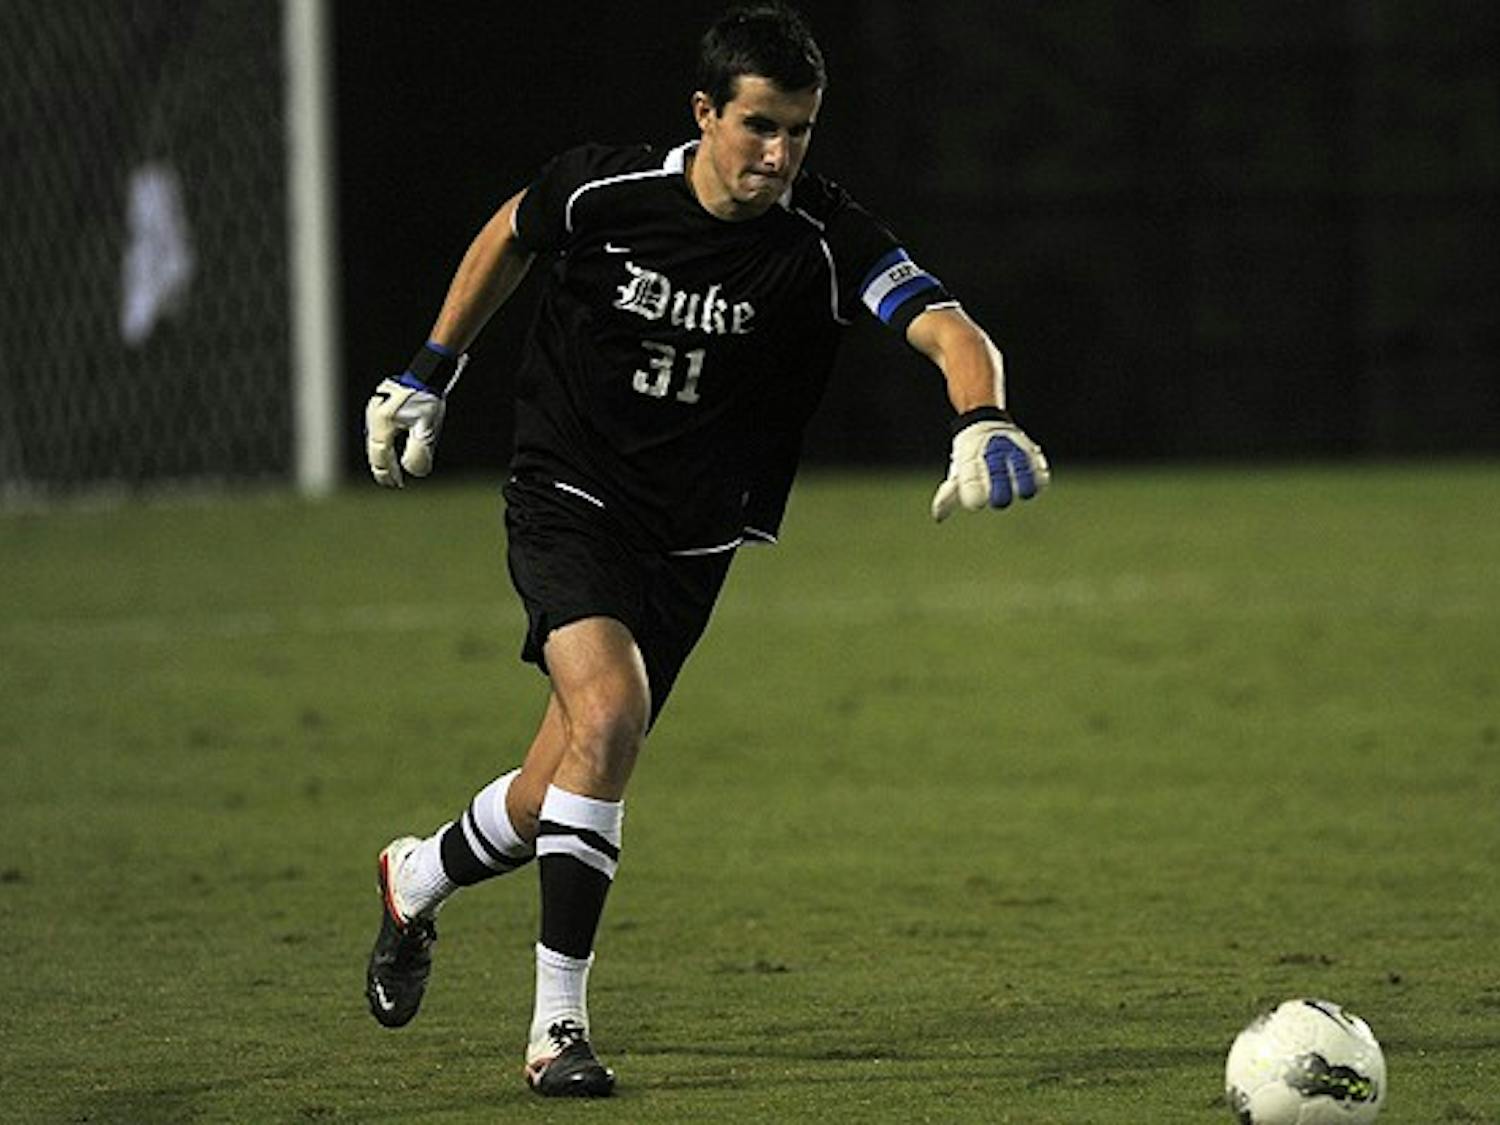 Goalkeeper James Belshaw is the lone senior on this year’s Duke team that has its veterans on the defensive end.